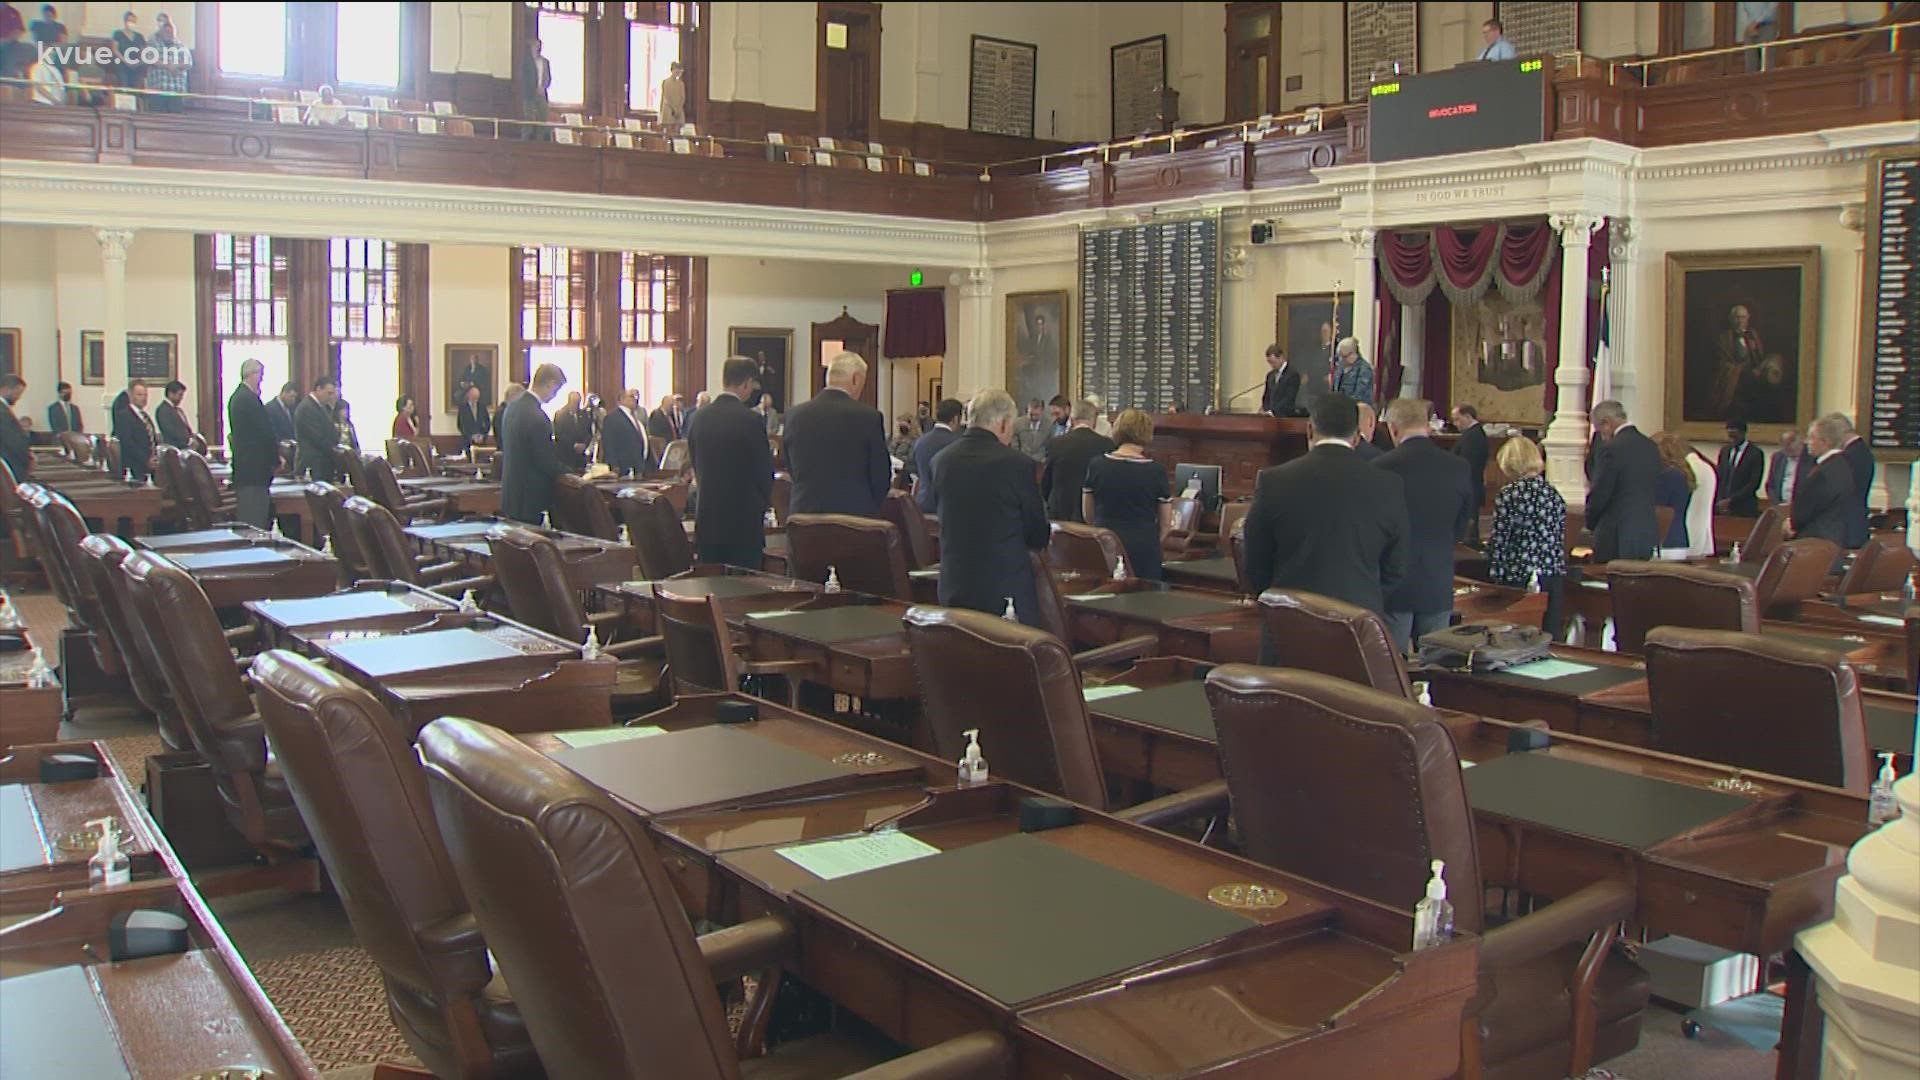 The 87th Texas Legislature's second special session started with a quorum, as Democrats are still in Washington D.C. trying to stop a Texas election reform bill.